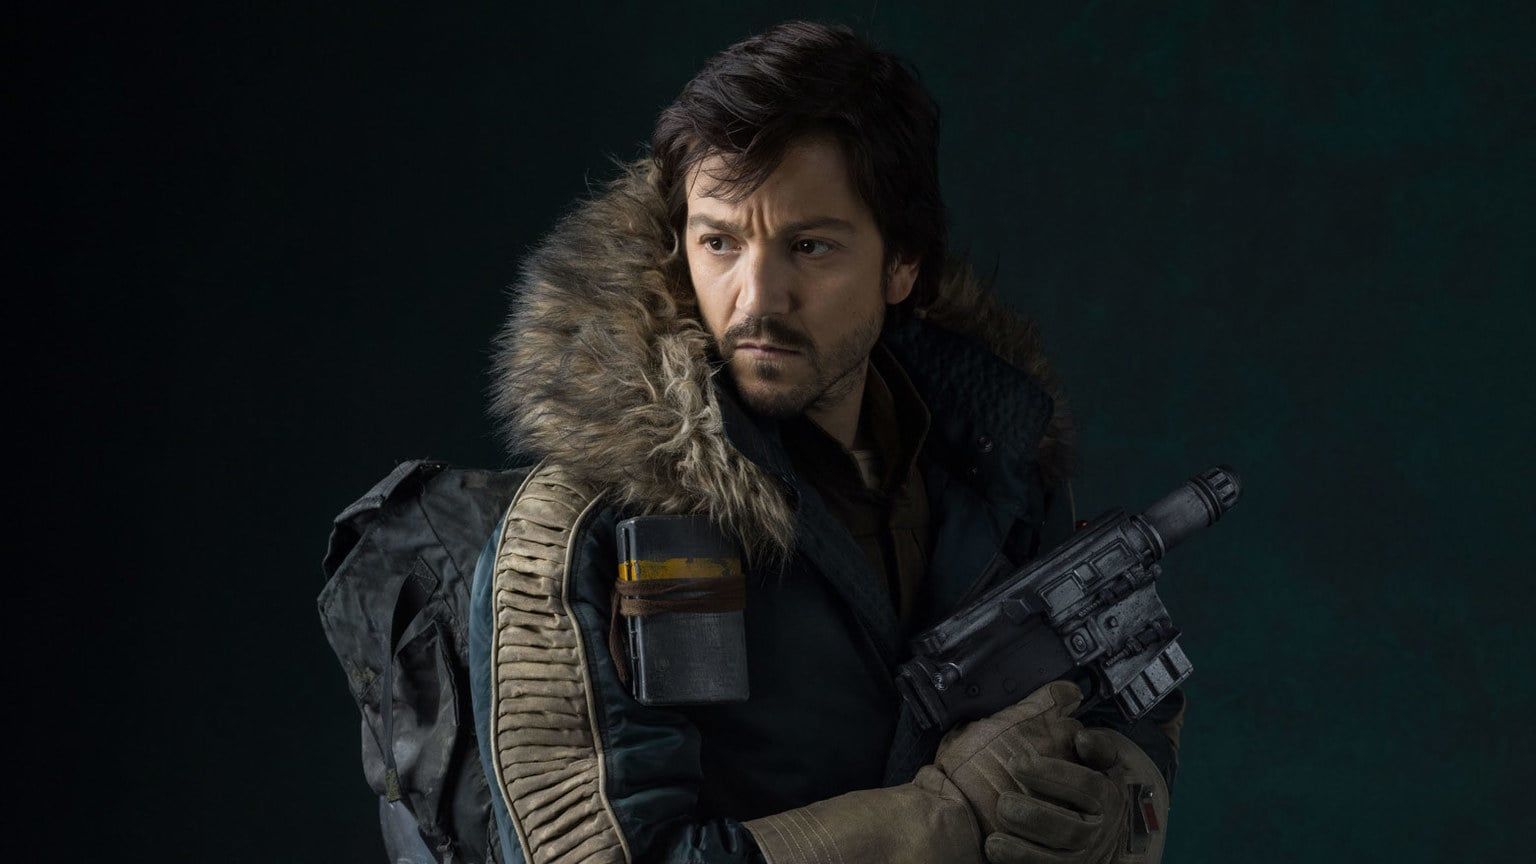 Diego Luna spotted filming 'Star Wars' show 'Andor